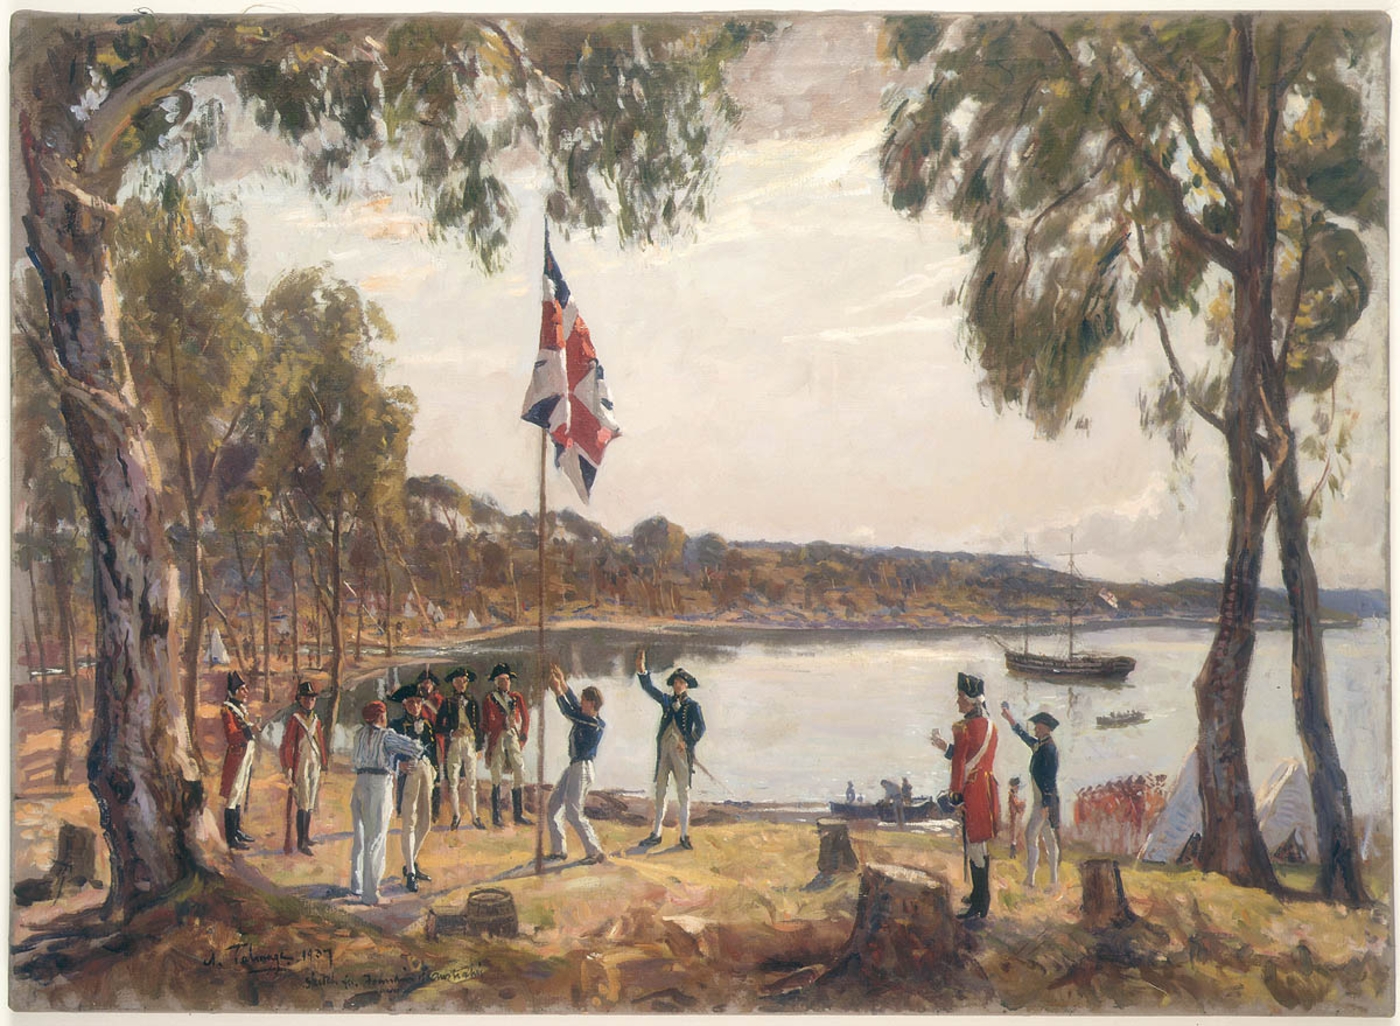 The Founding Of Australia By Capt Arthur Phillip Rn Sydney Cove Jan 26th 1788 State Library